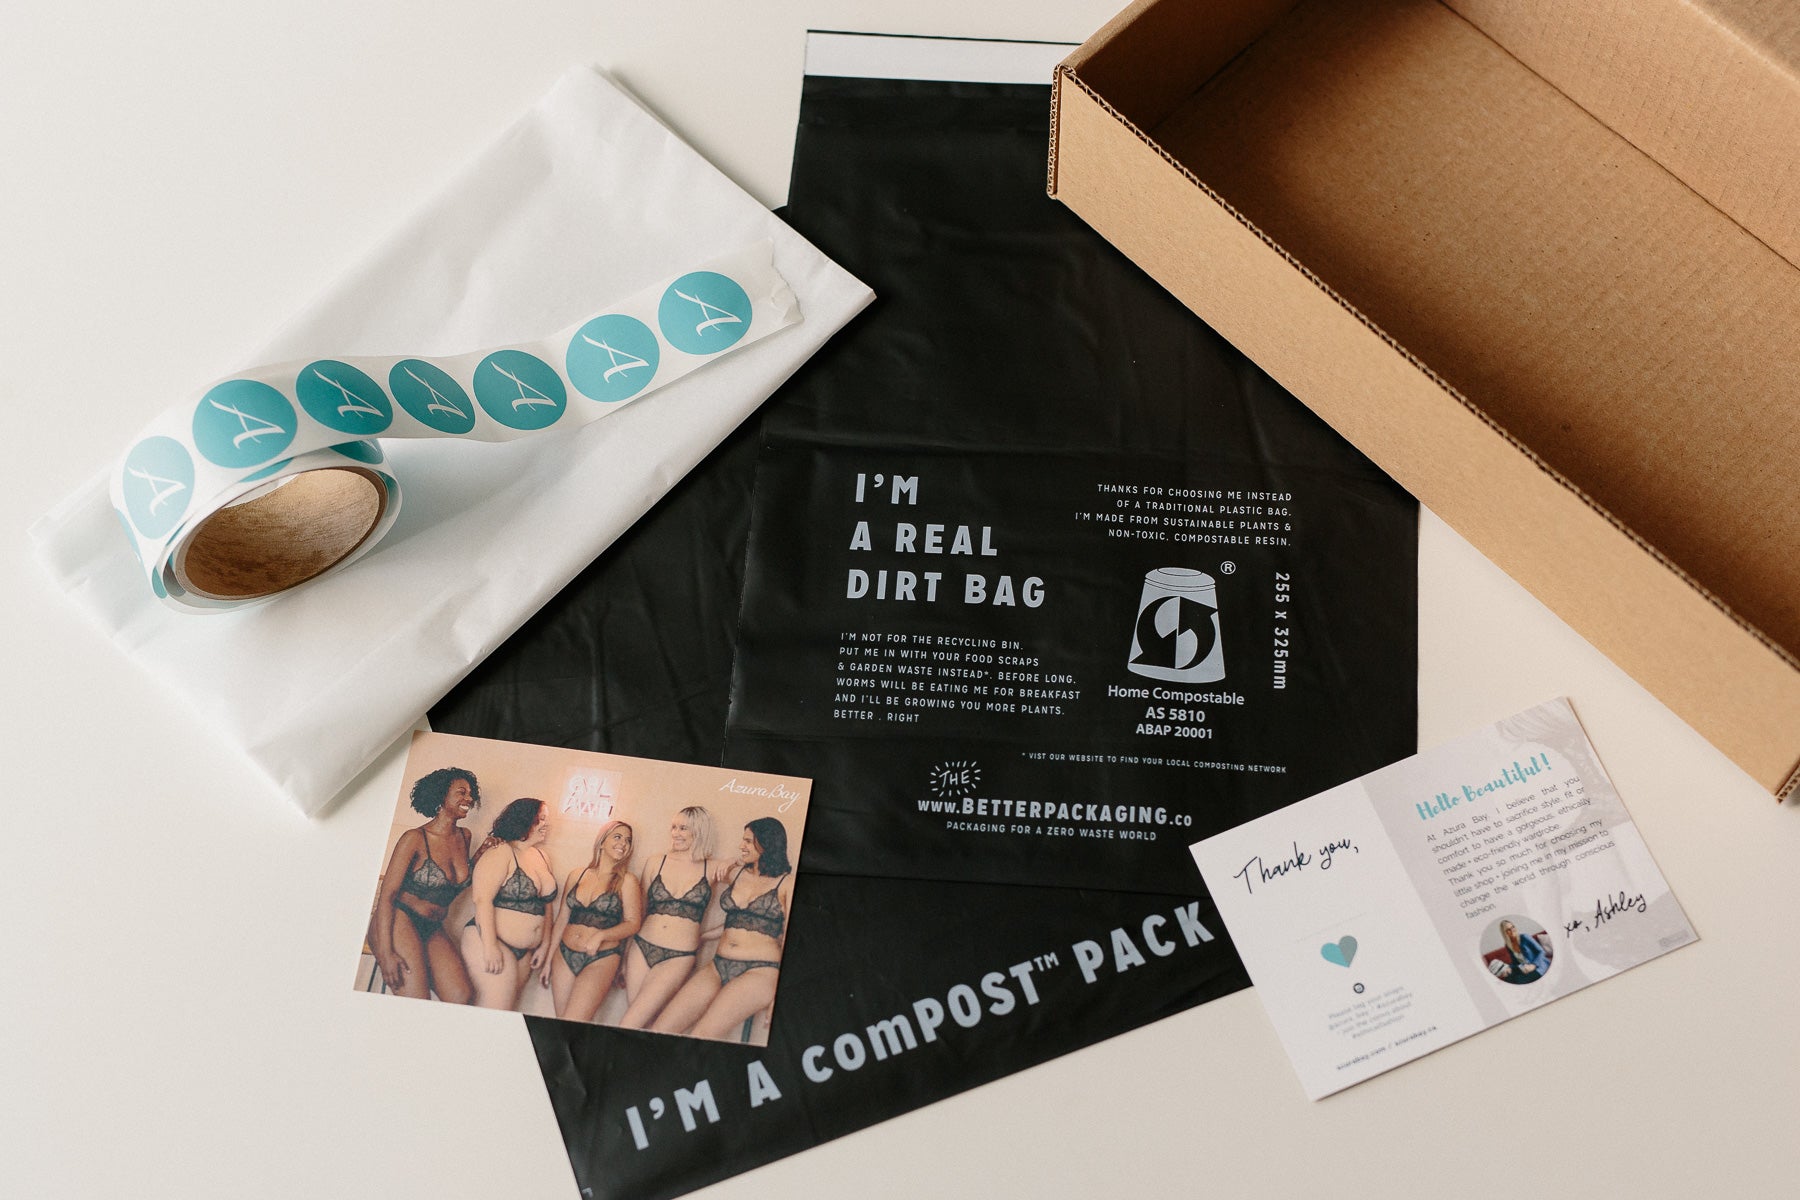 Plastic Free July at Azura Bay: Low waste/zero waste packaging + compostable mailers